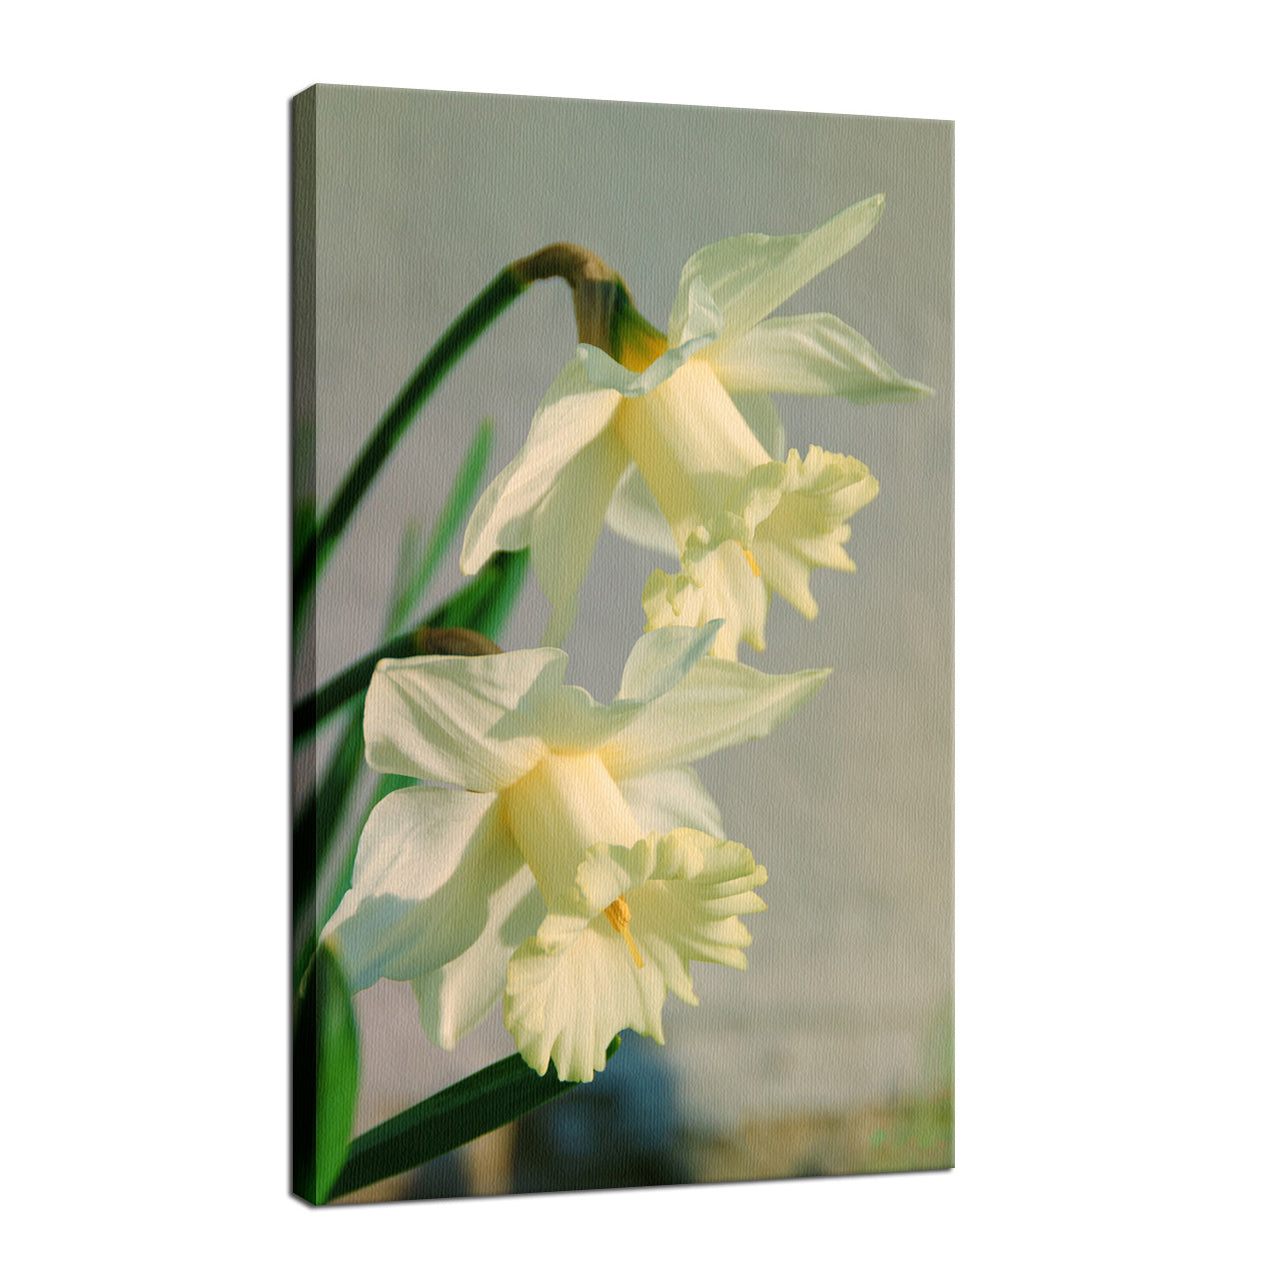 Colorized Daffodils Nature / Floral Photo Fine Art Canvas Wall Art Prints  - PIPAFINEART